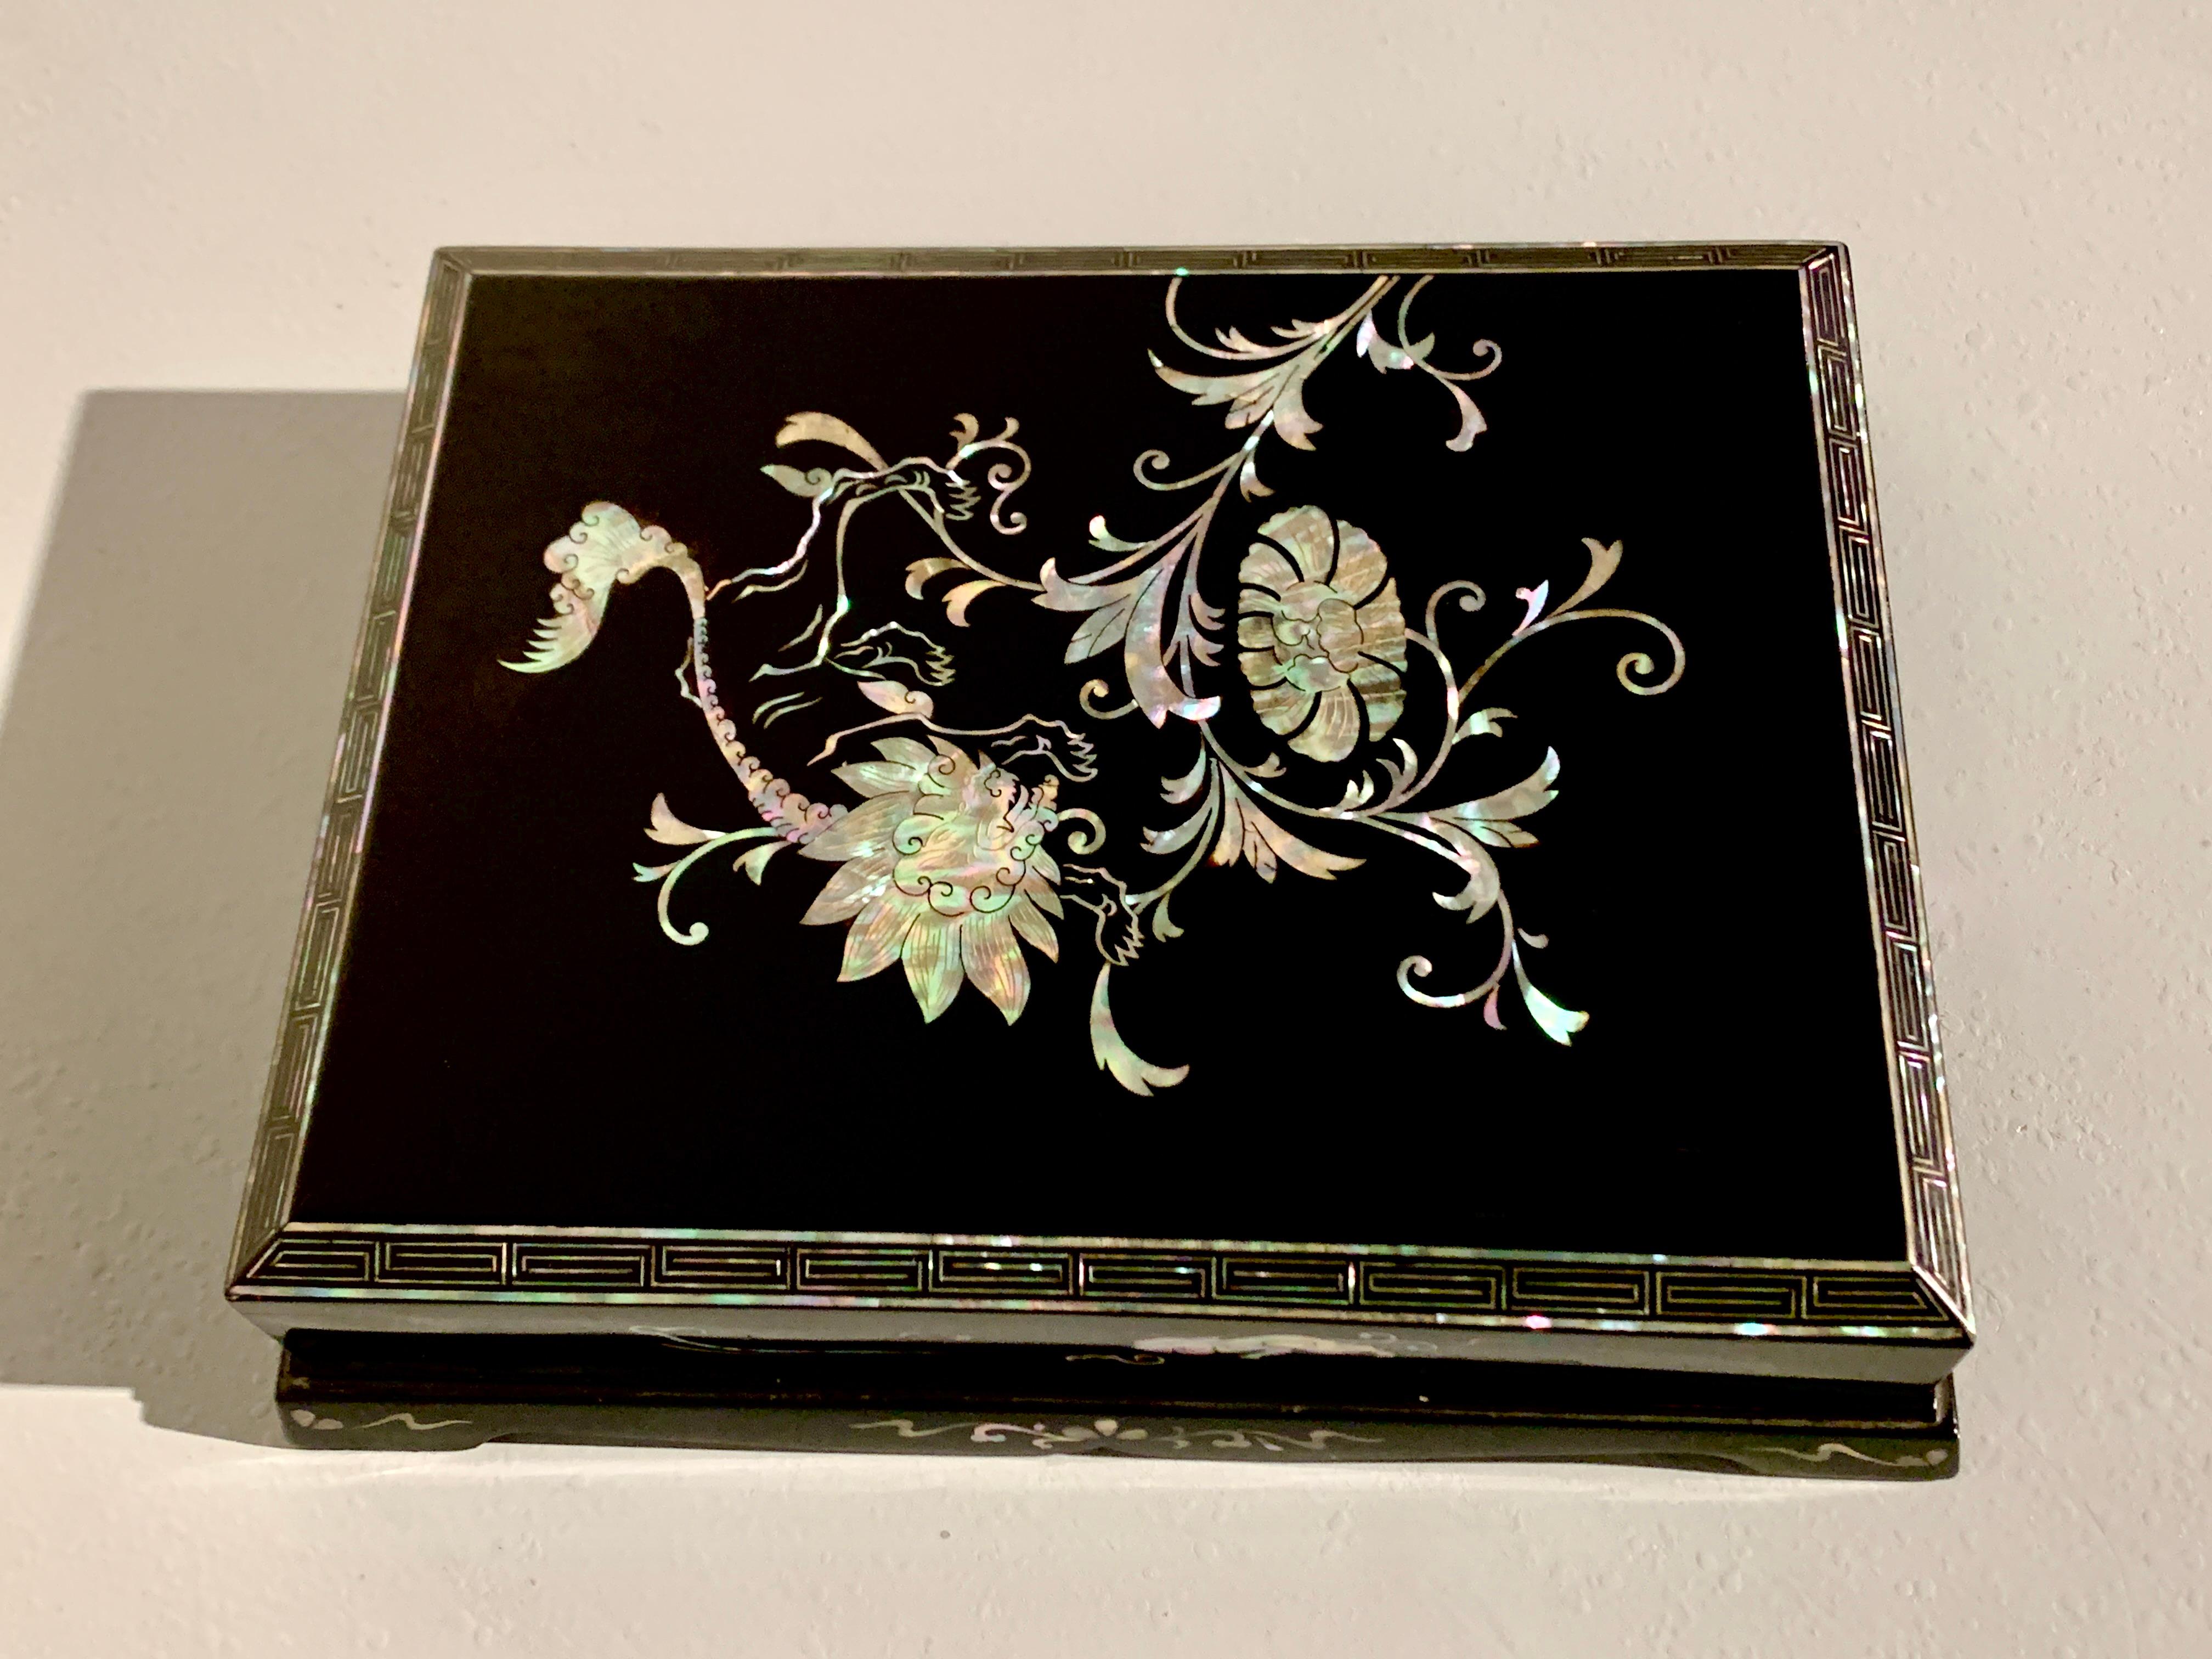 An elegant Korean black lacquer and mother of pearl inlay stationery box with lion and peony, circa 1930's, Korea.

The rectangular box and cover supported on a raised platform with shaped aprons all around. The cover of the box faceted design, with